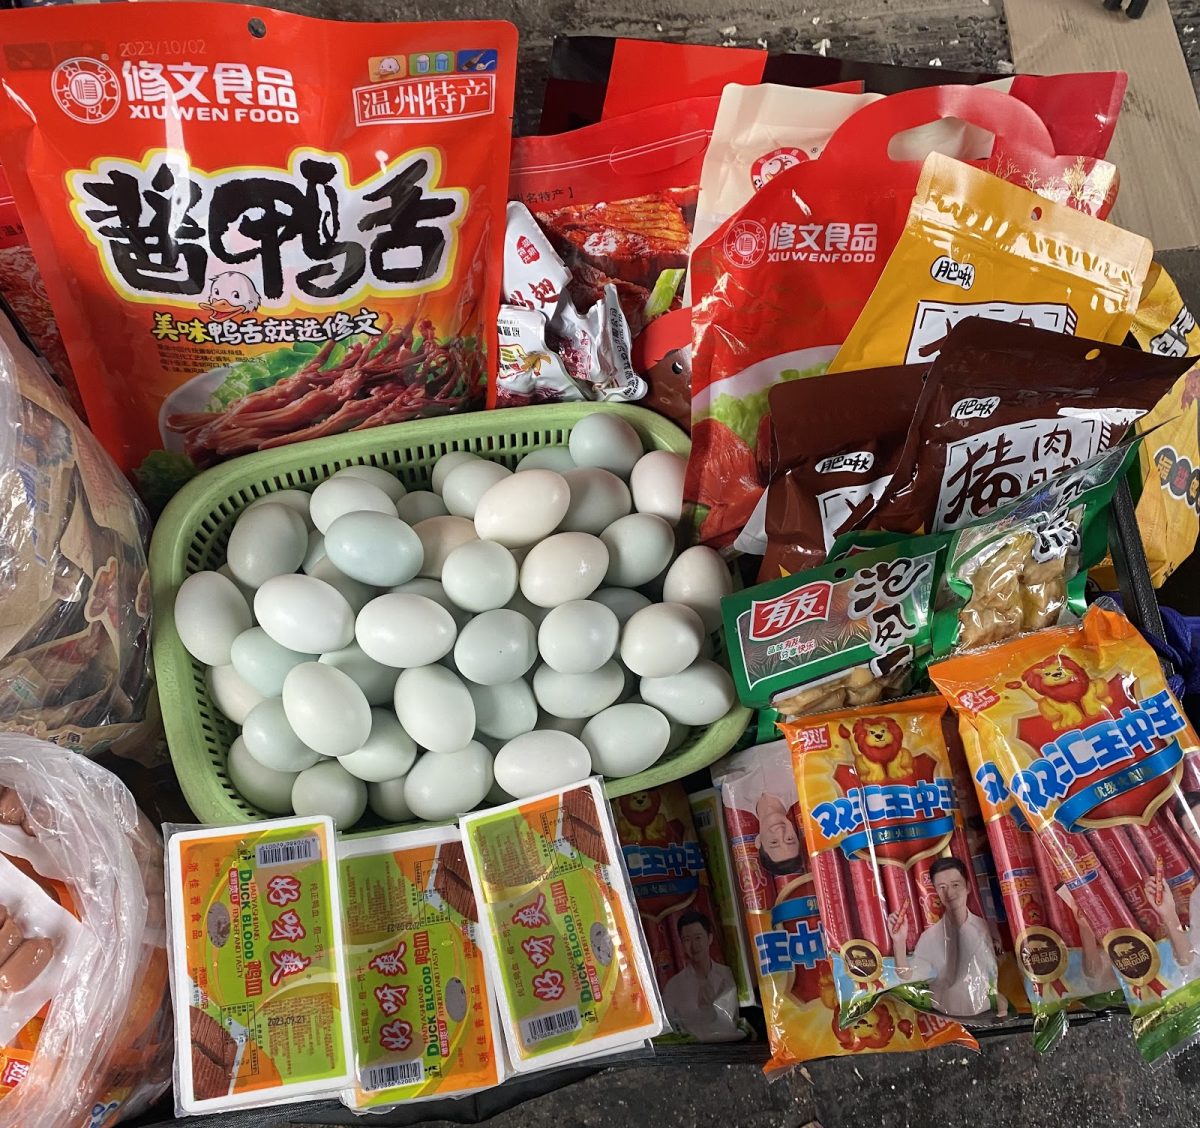 Chinese food like duck blood, duck eggs, sausages, and snacks are sold near the Long Island Railroad station.